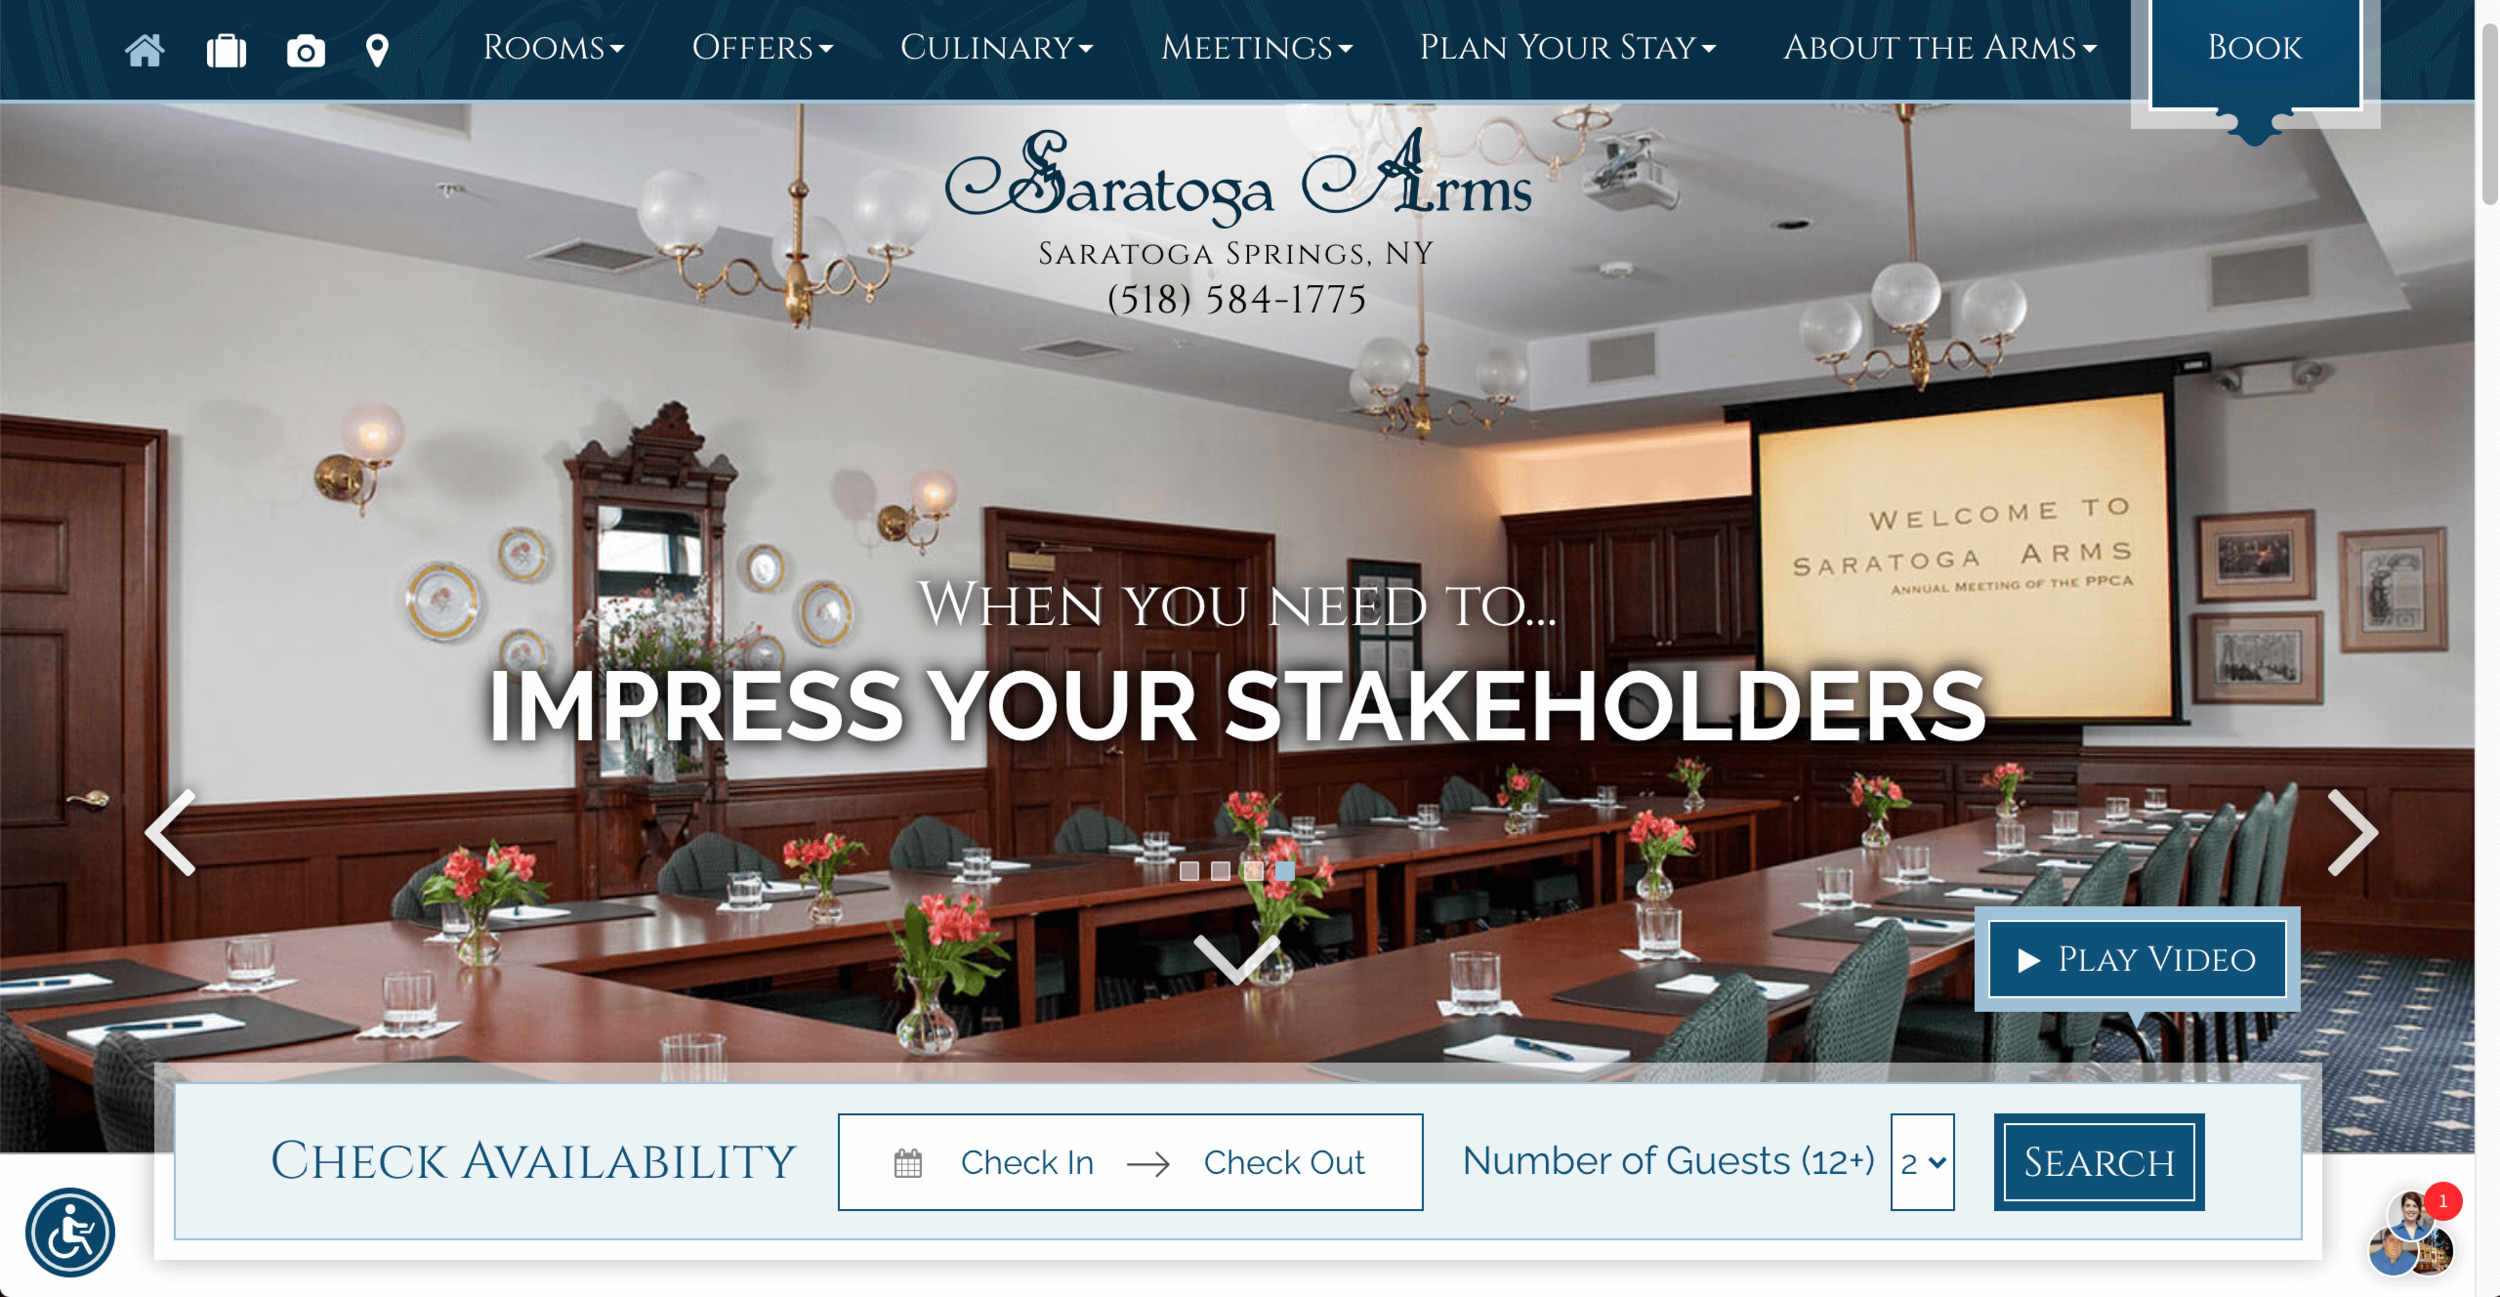 hotel-copywriting-examples-saratoga-arms-3.png